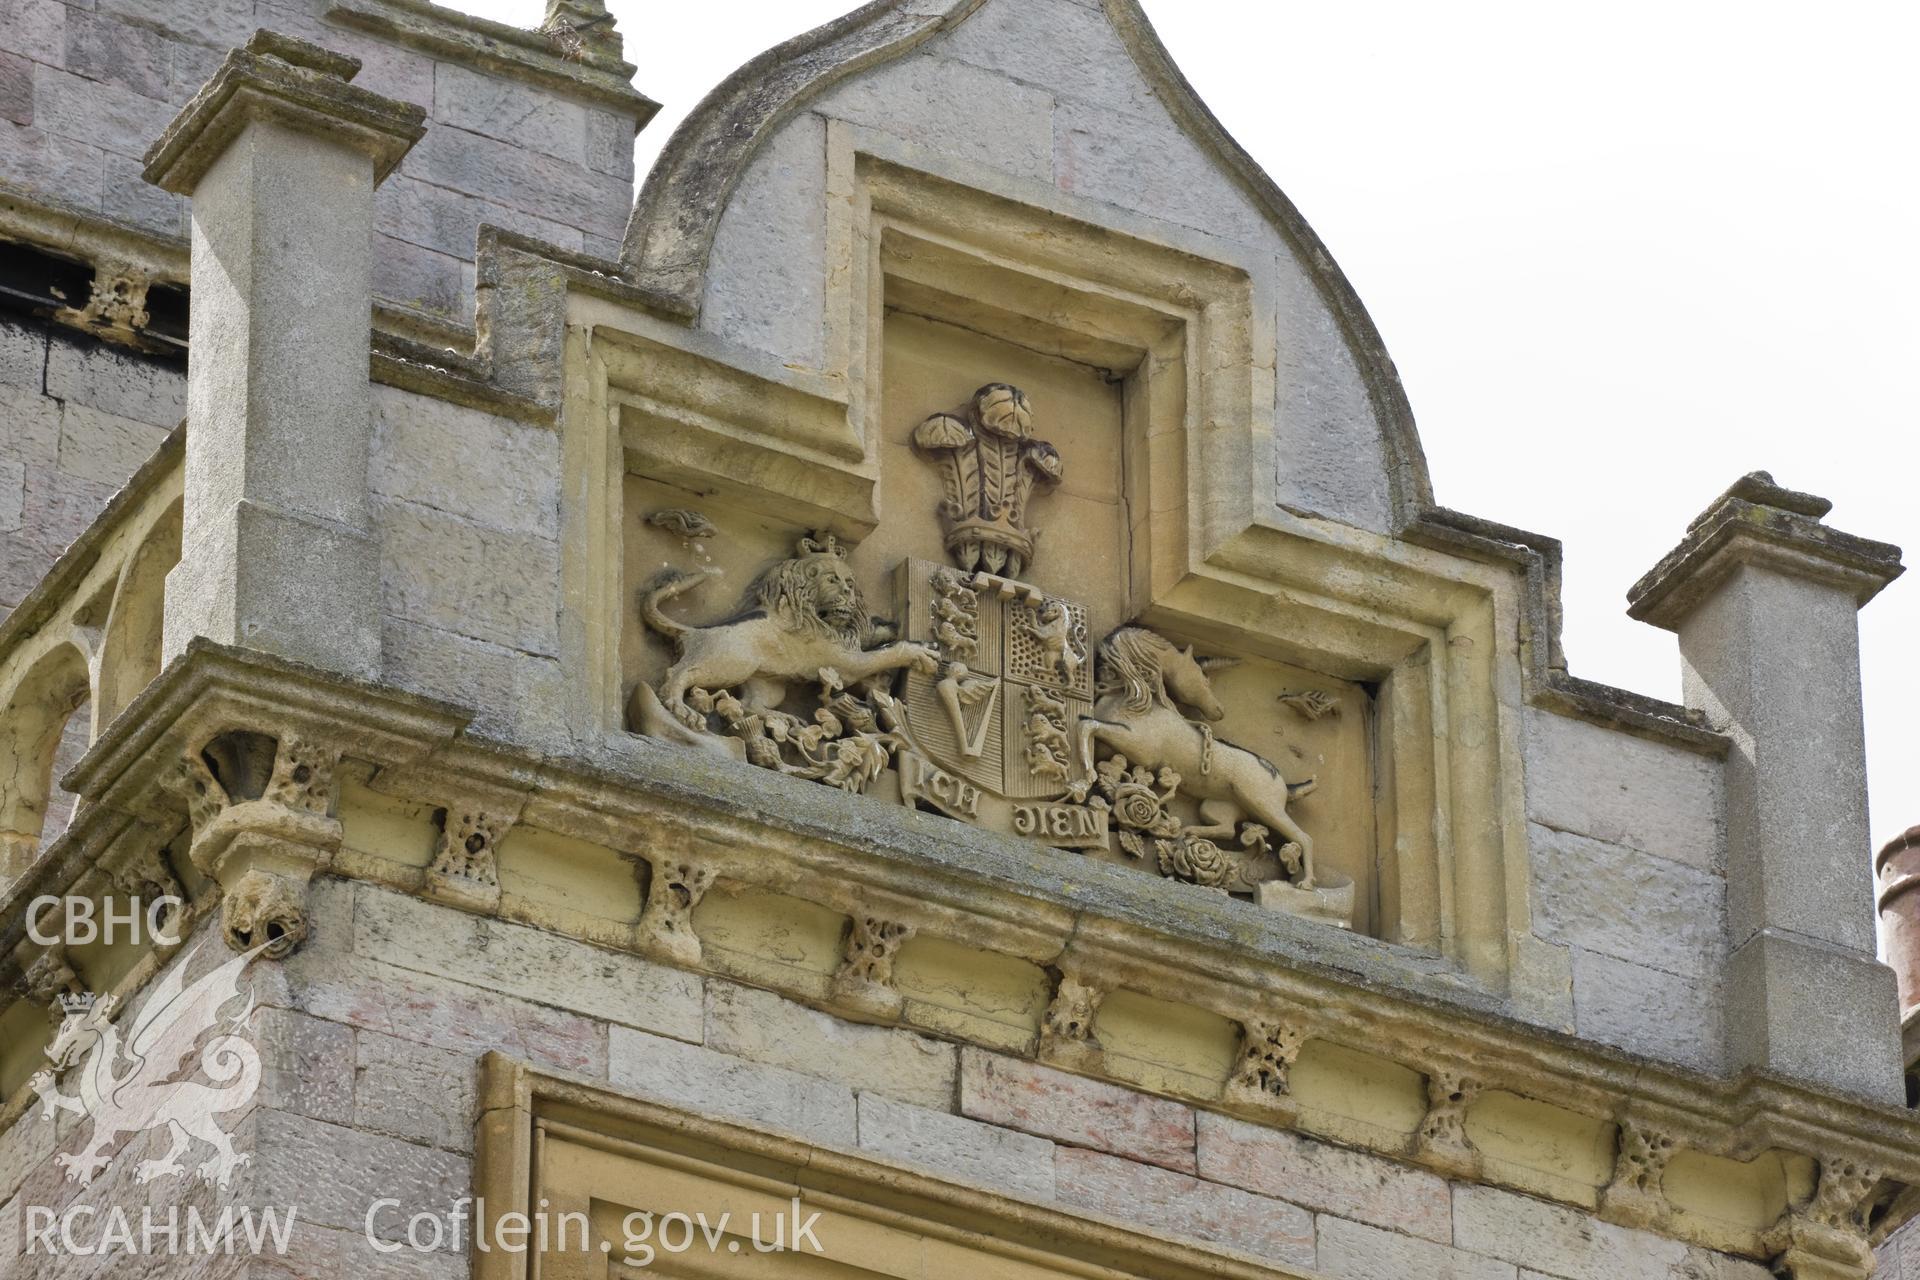 Coat of arms over entrance steps.